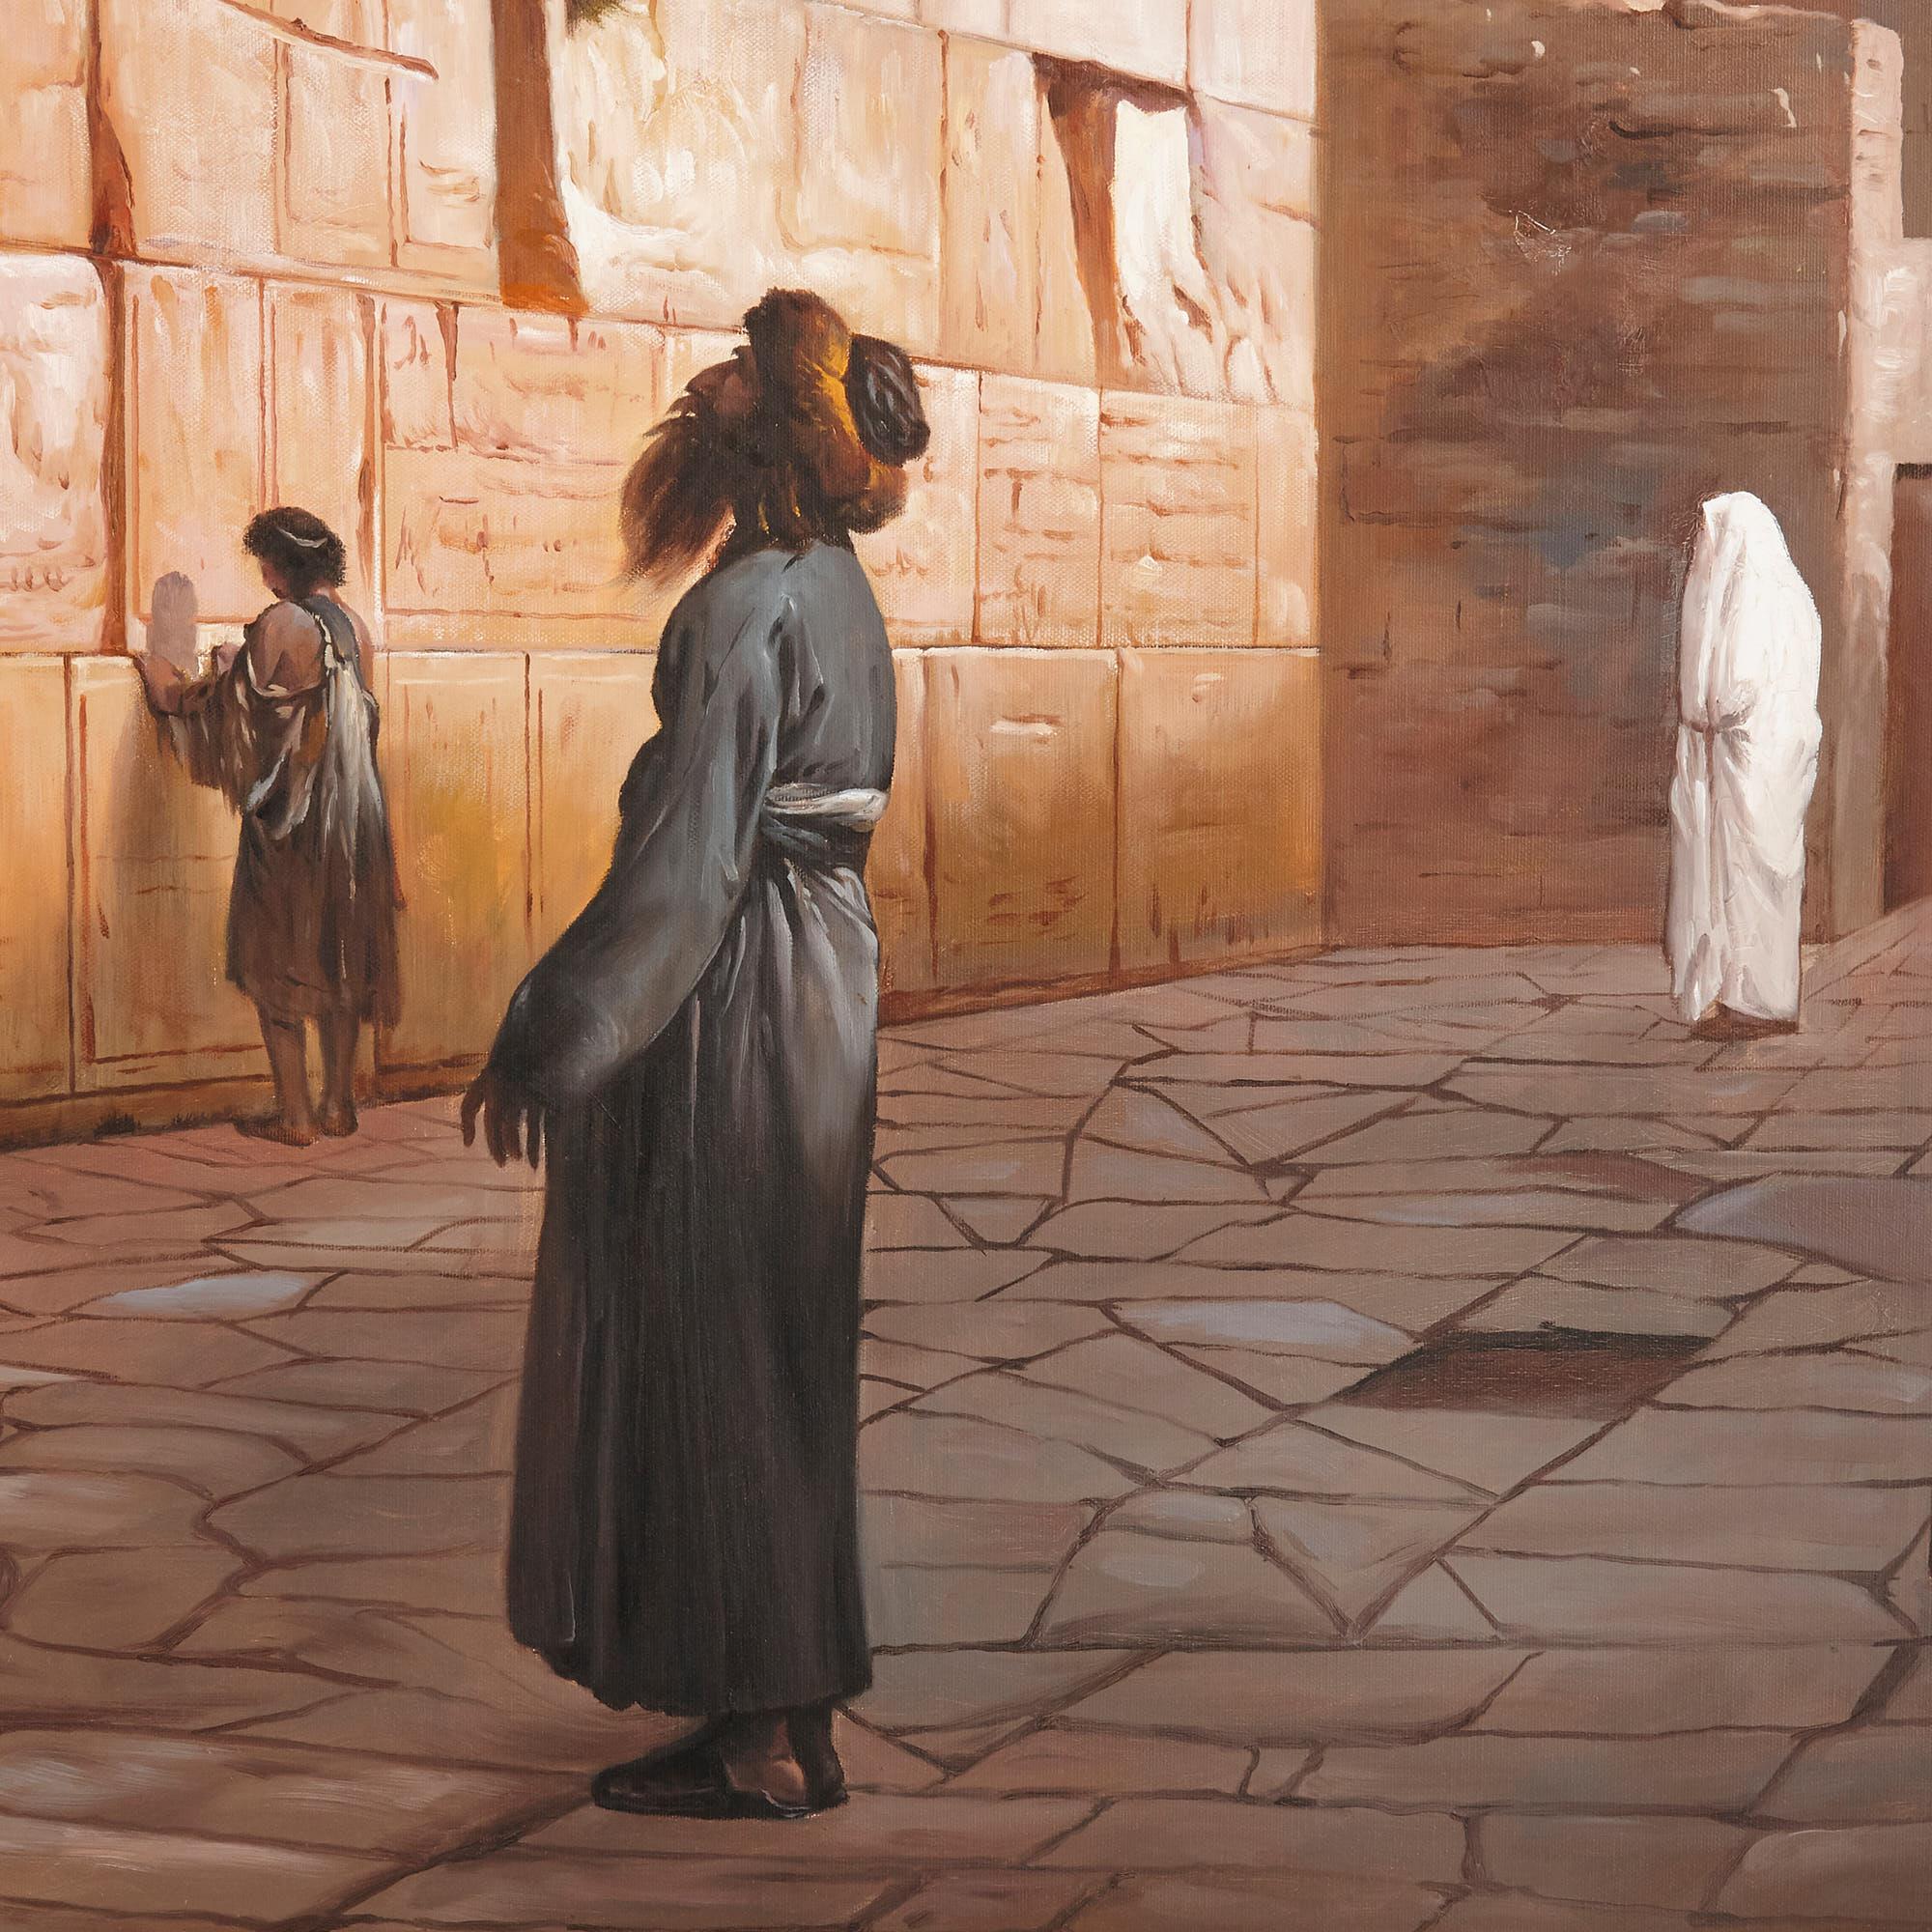 This beautiful painting portrays the Wailing Wall—also known as Solomon’s Wall—in Jerusalem. The painting is after an original by Jean-Léon Gérôme from 1876. The artist of this present piece has employed a light colour palette and utilised moments